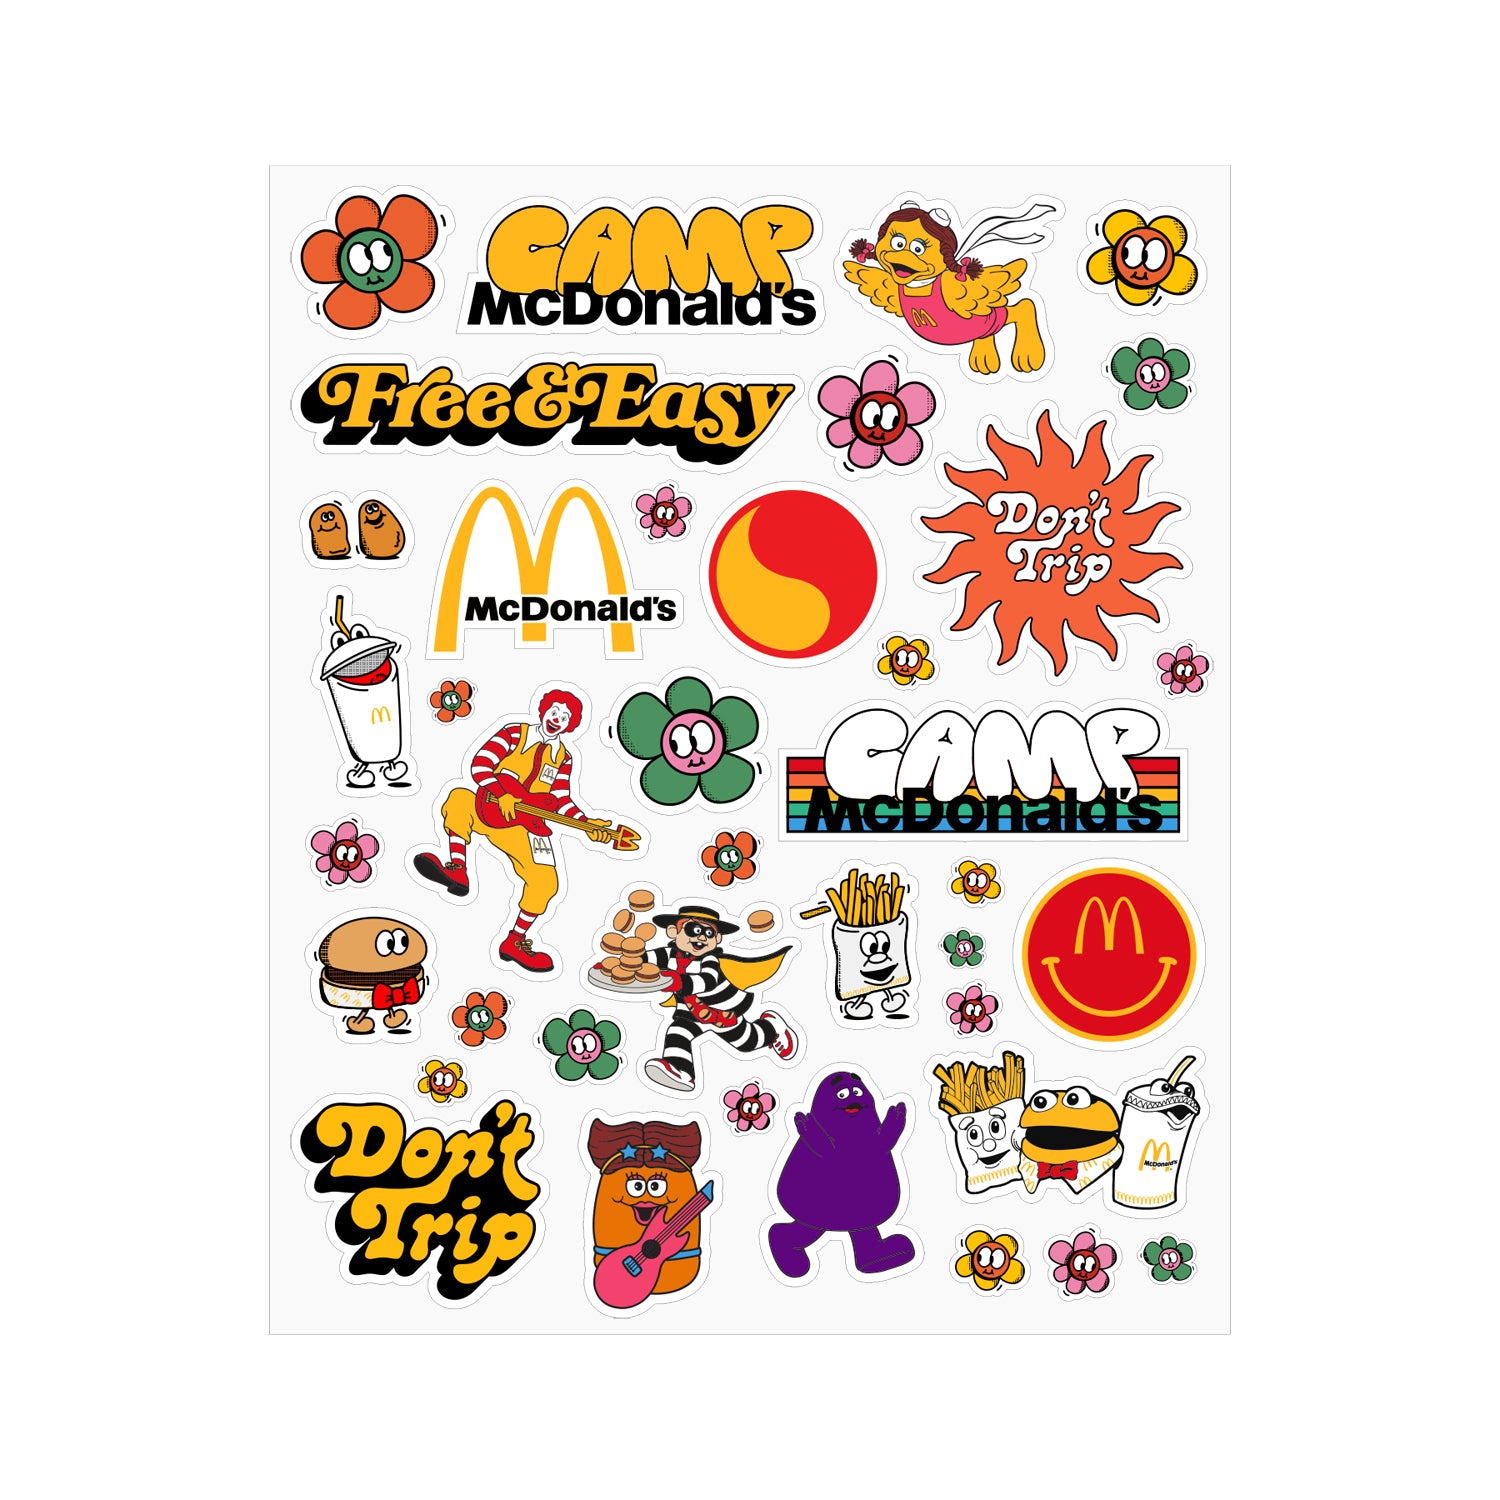 Mcdonald's Free & Easy assorted sticker sheet with 39 multicolor stickers on a white background -Free & Easy 